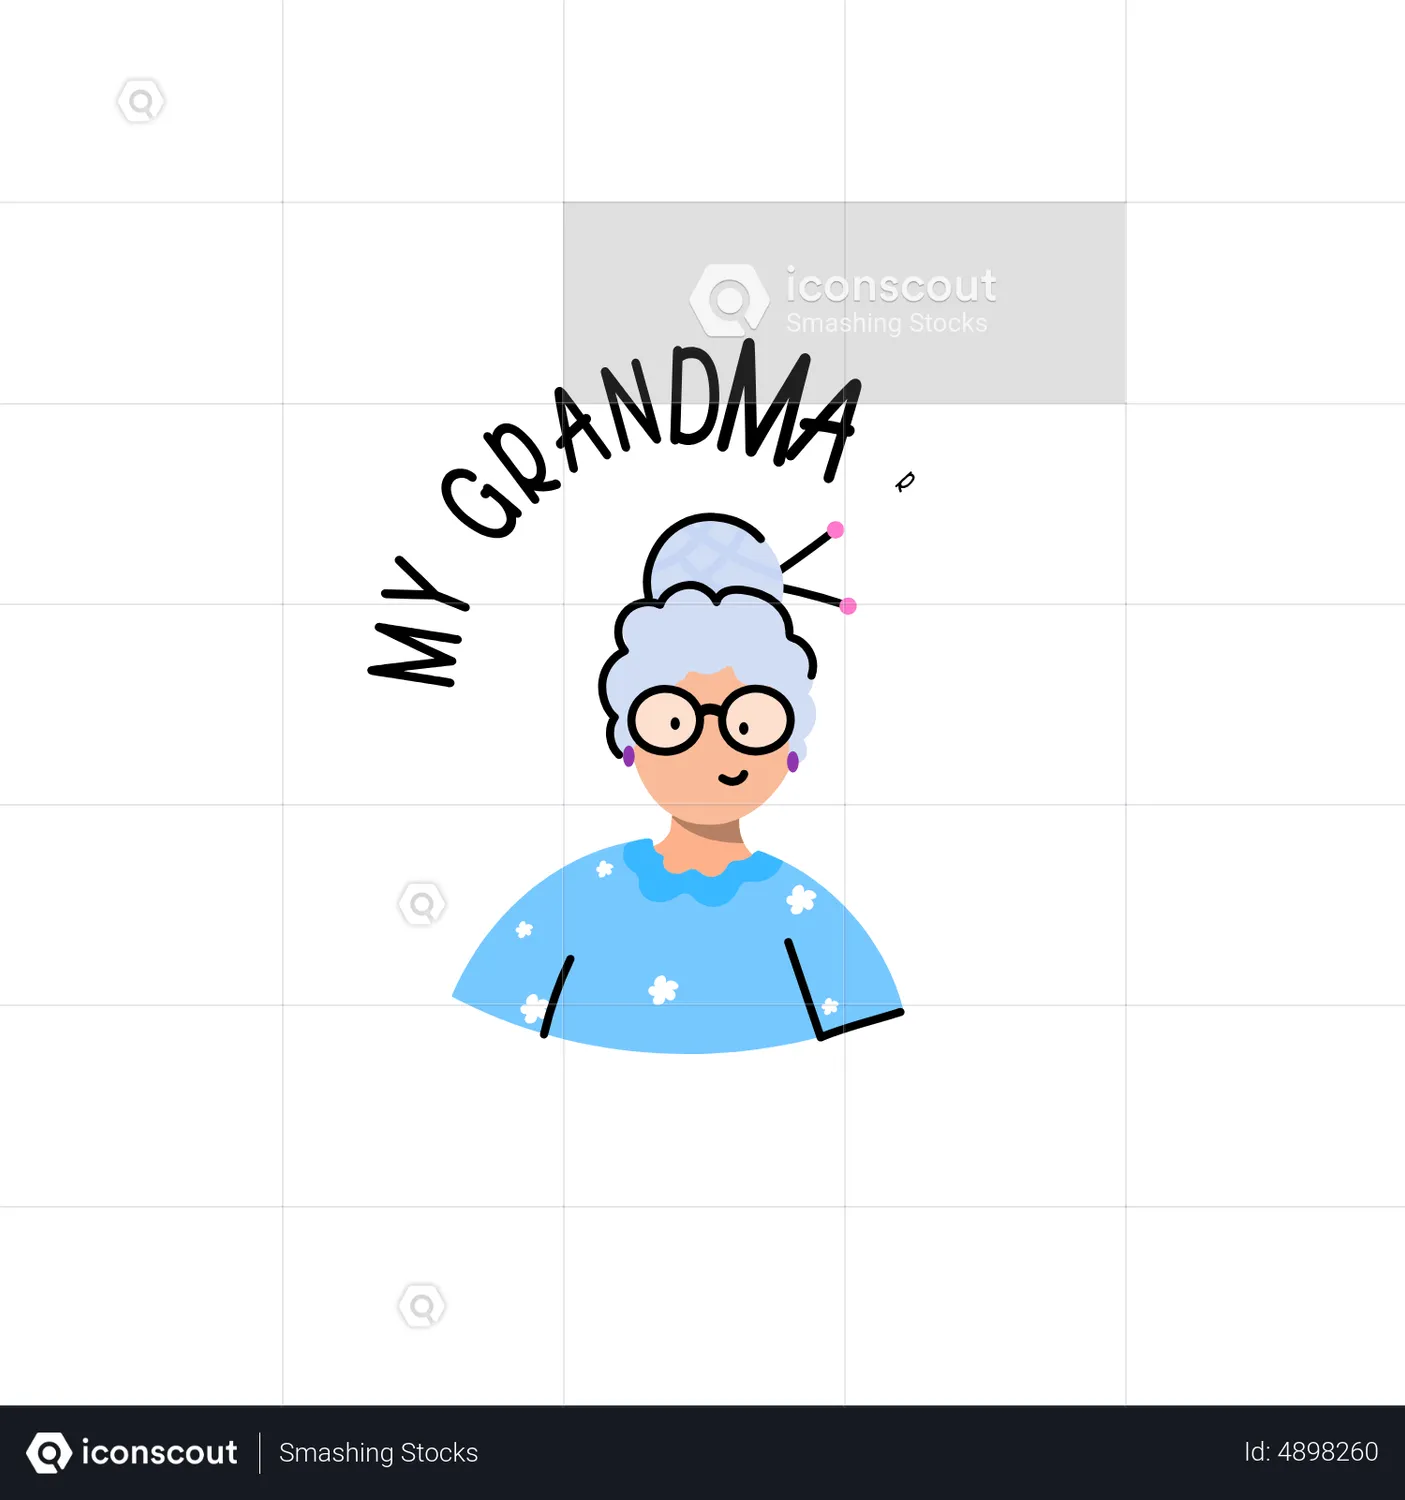 Old Man Avatar Animated Icon download in JSON, LOTTIE or MP4 format